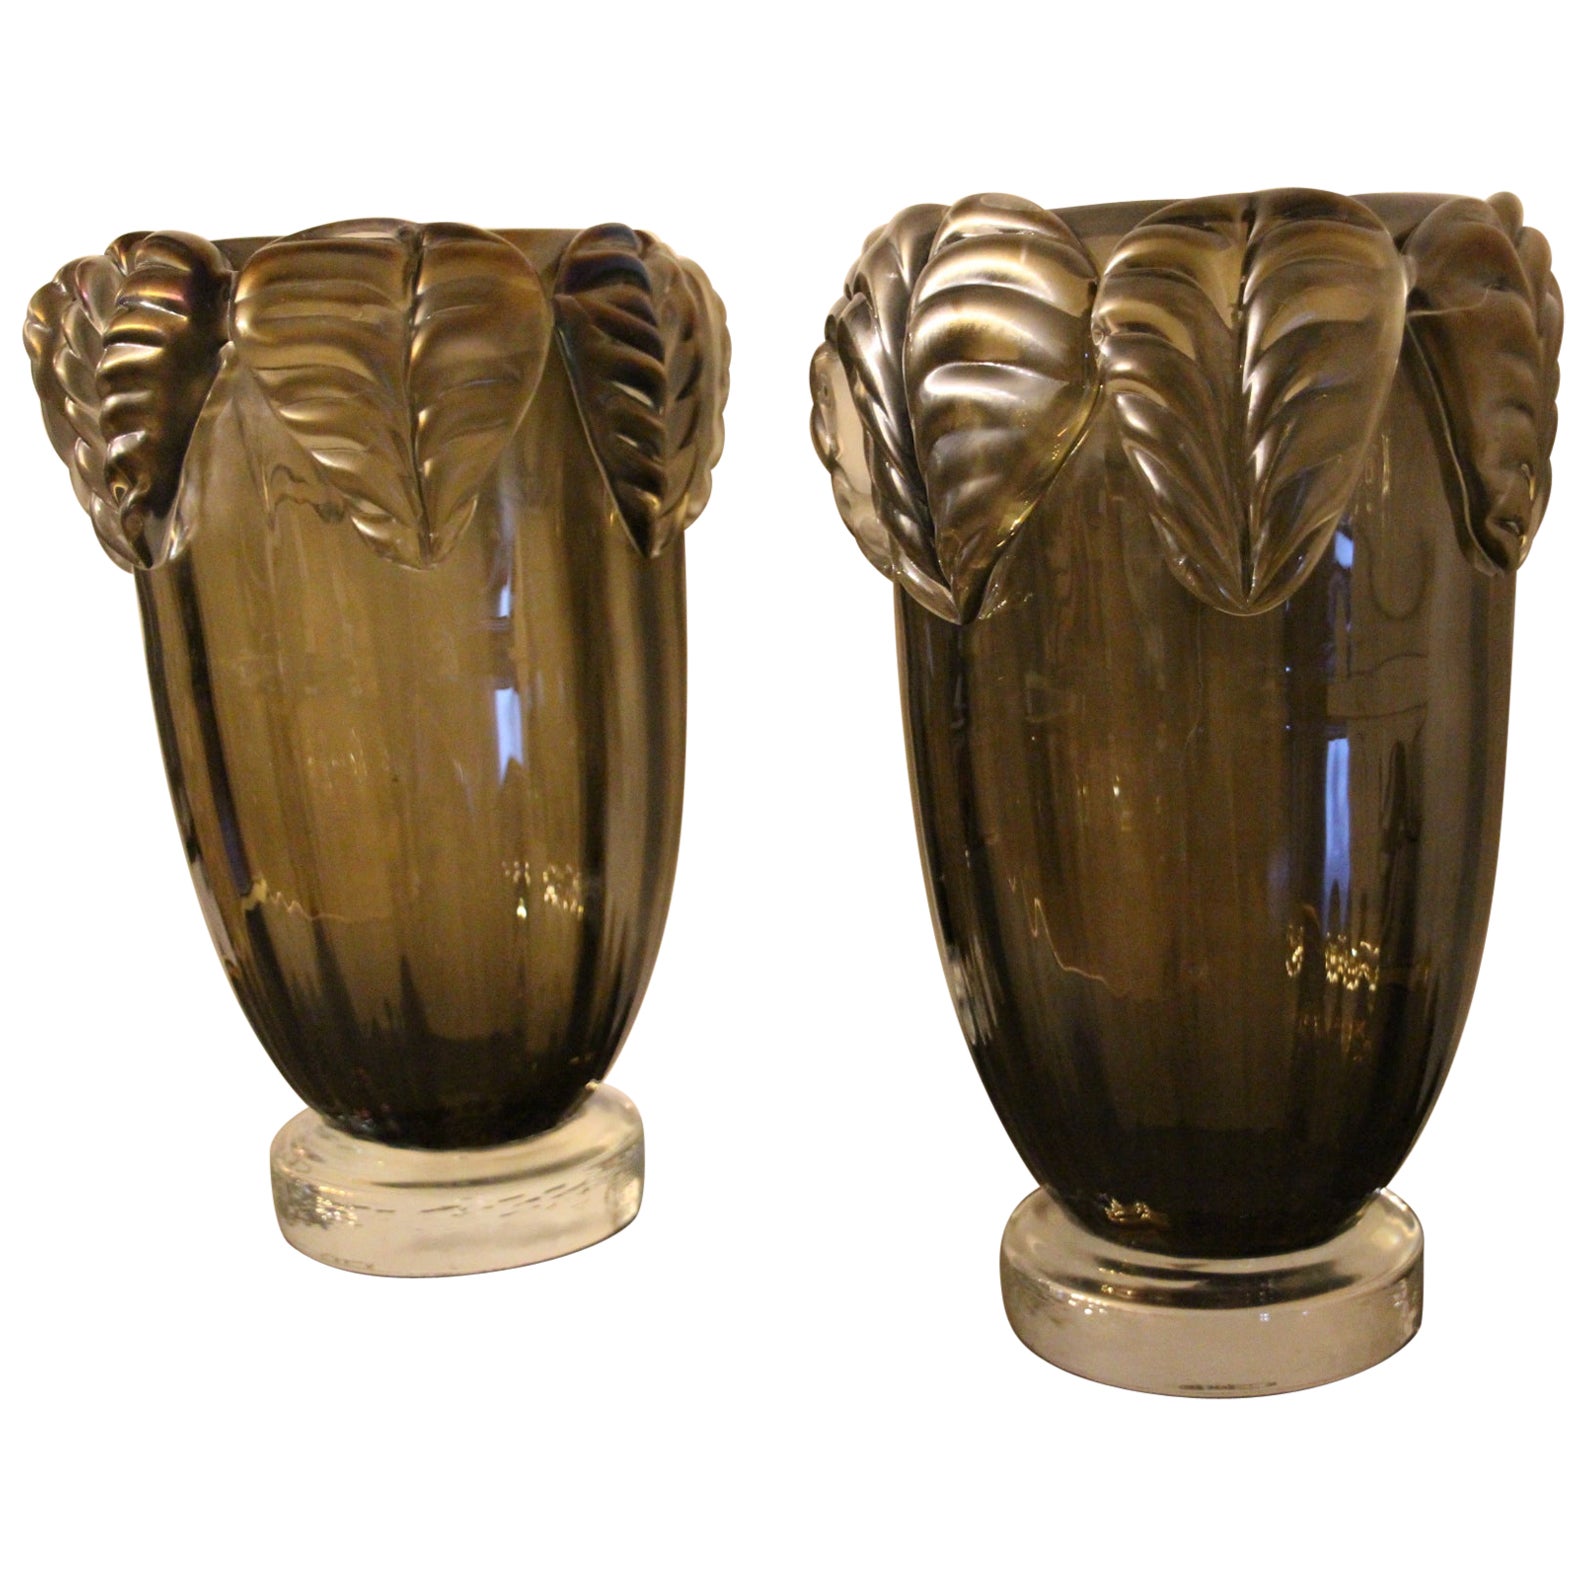 Pair of Large Smoke Color and Iridescent Murano Glass Vases by Costantini